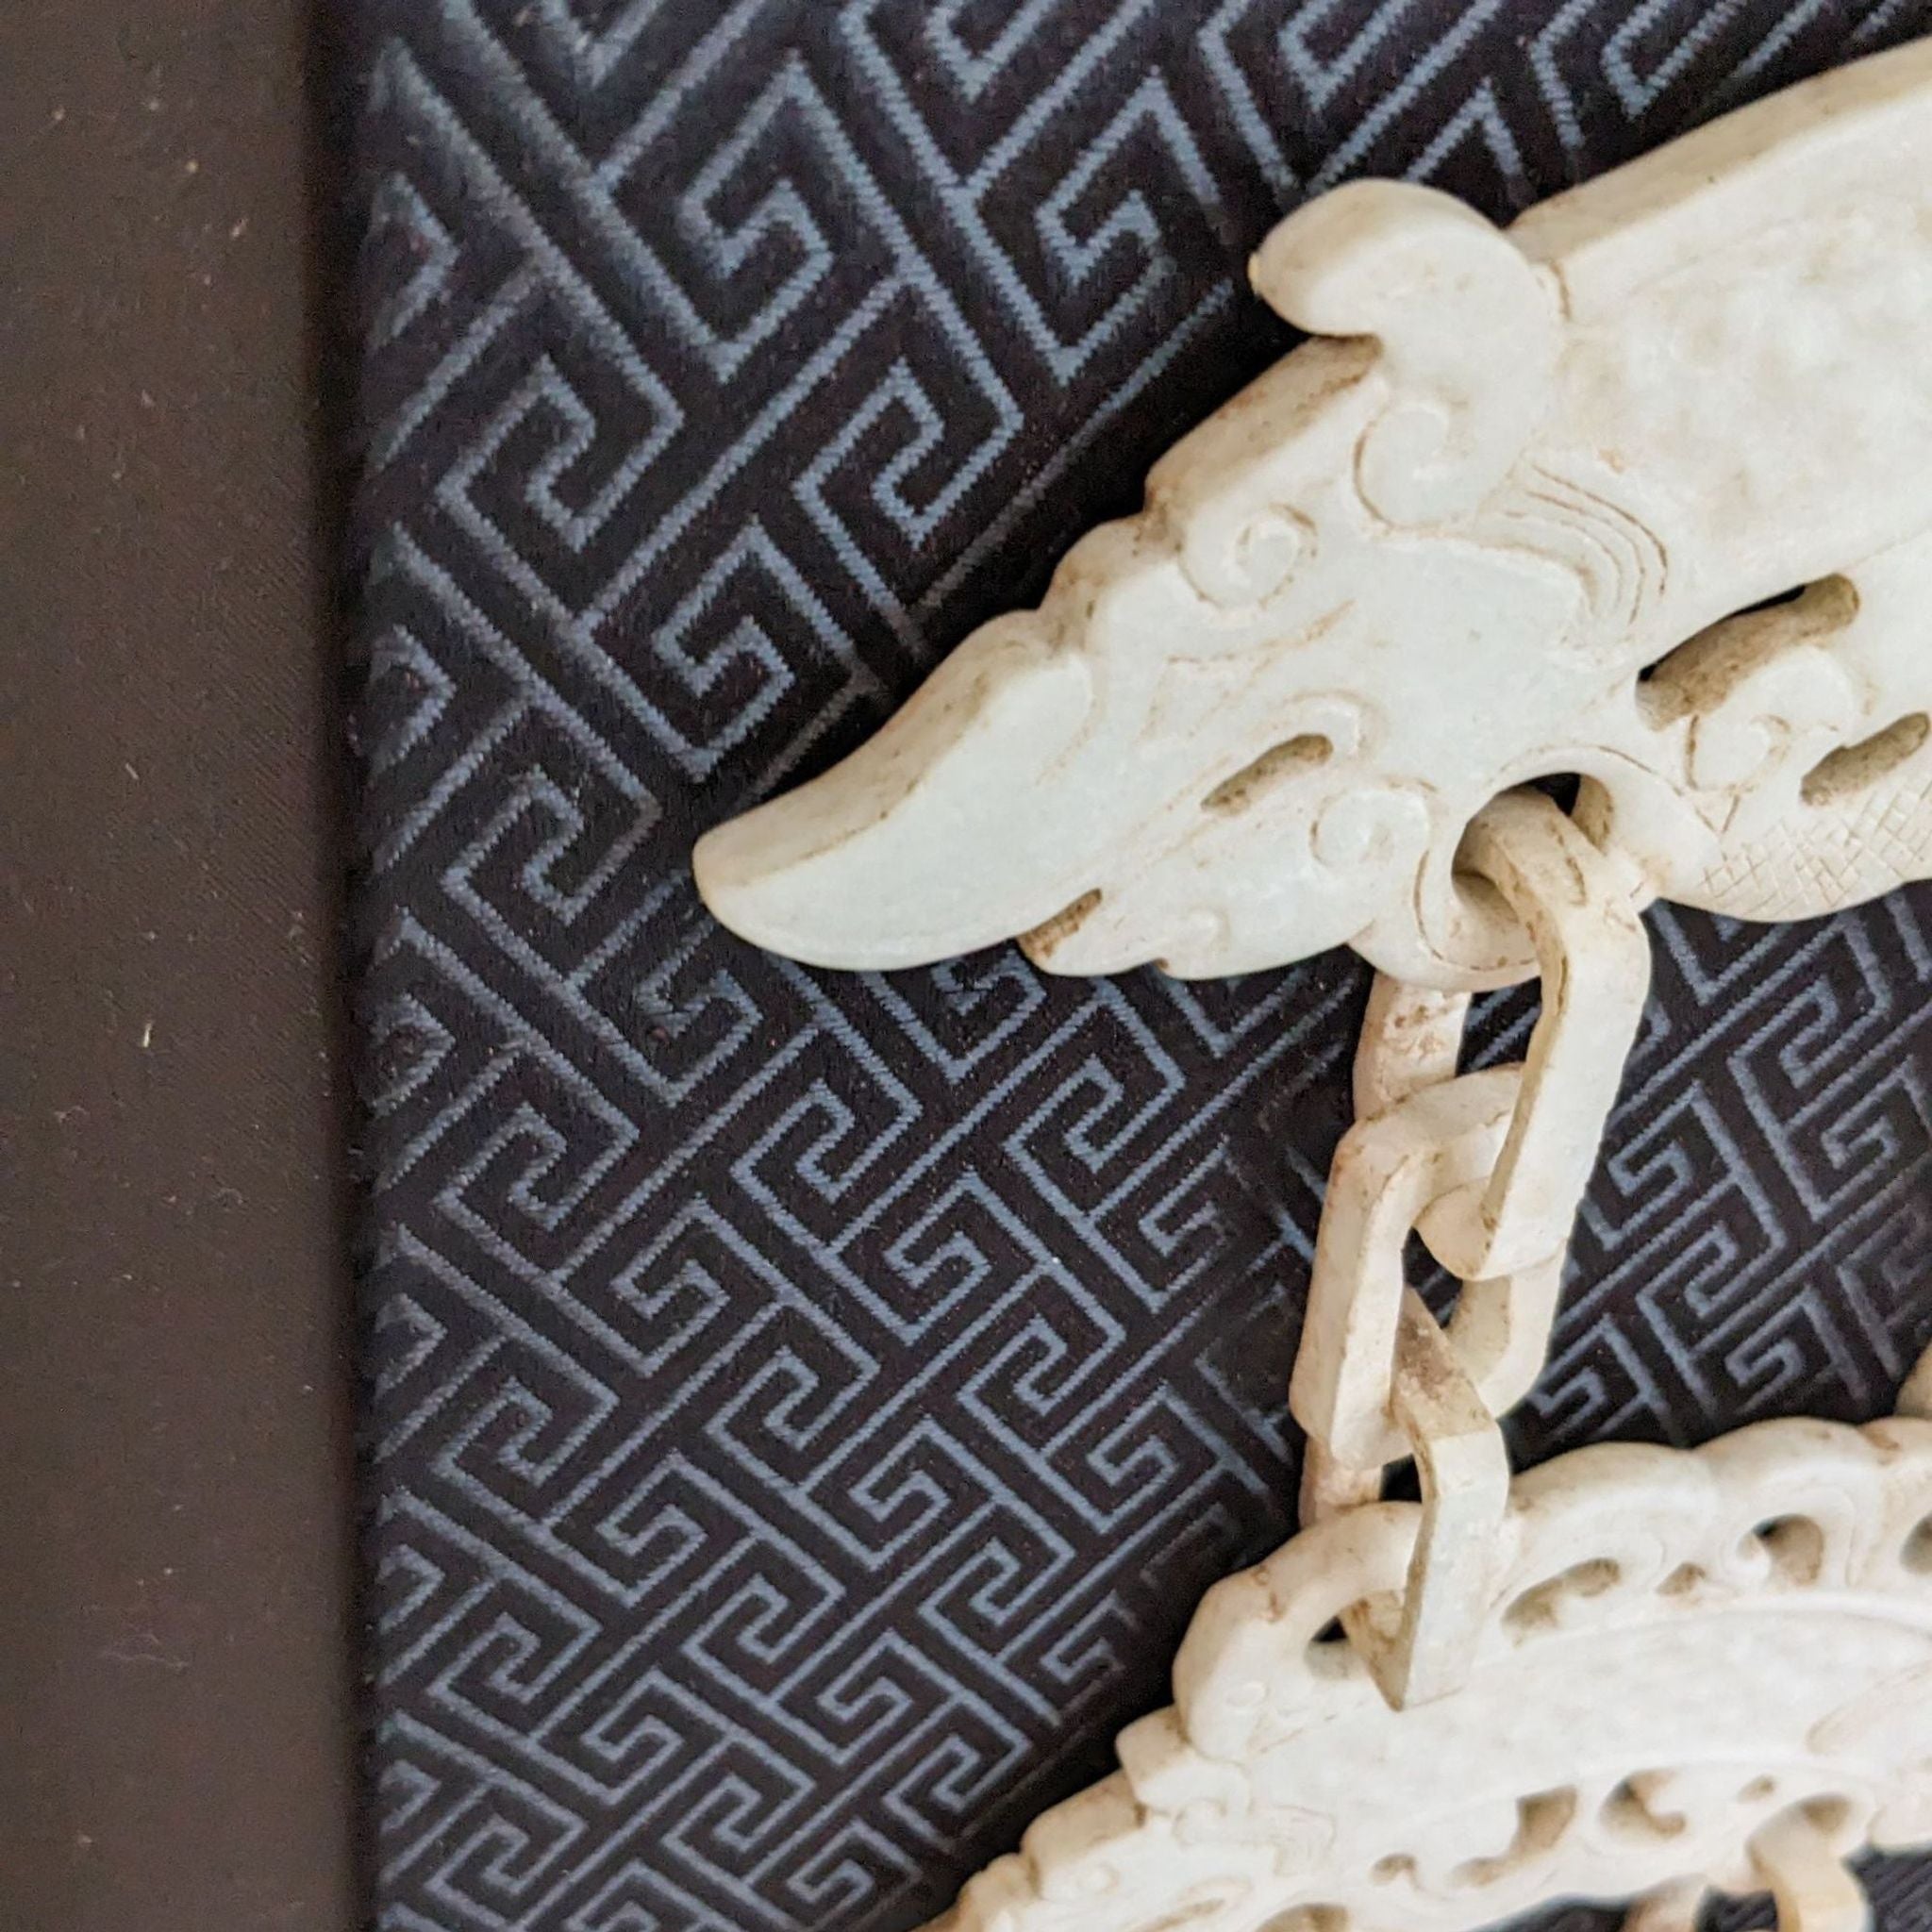 Close-up view of Reperch print showing detailed white jade carving against a contrasting intricate background.